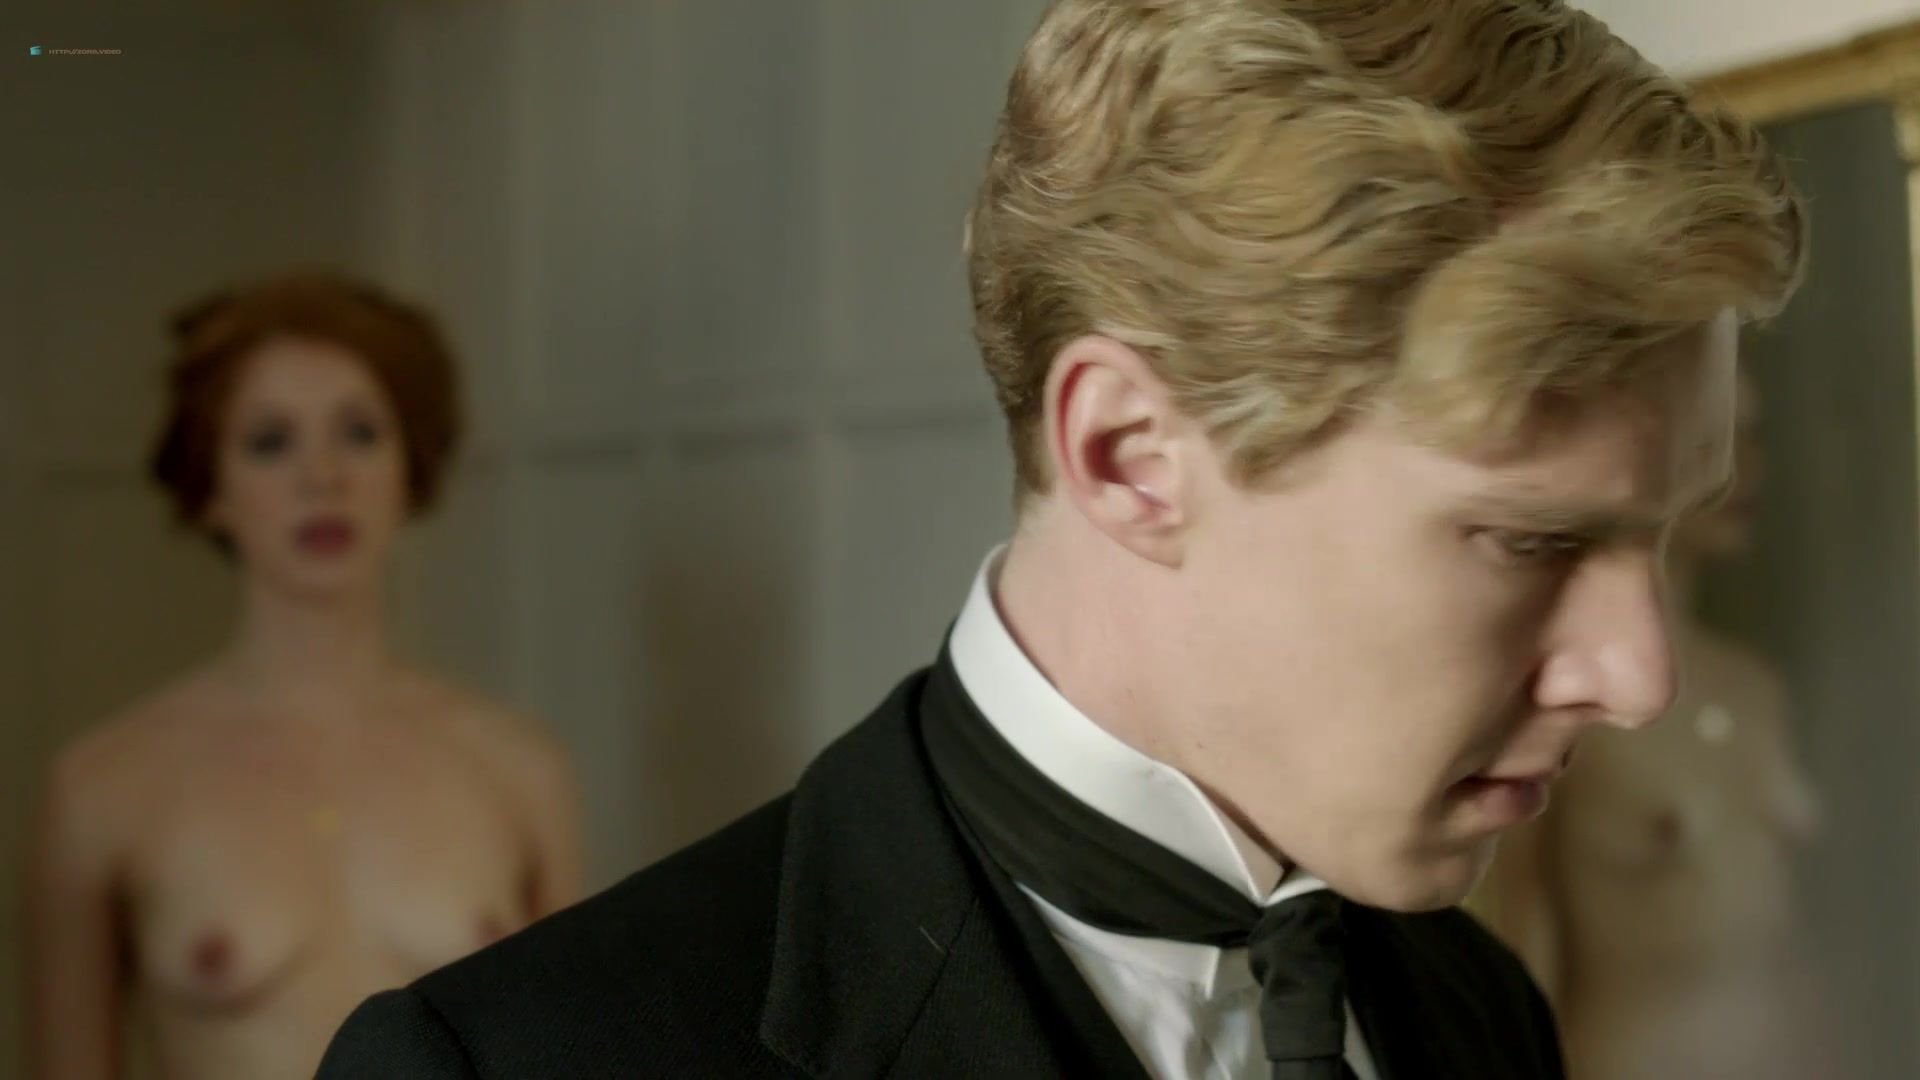 Cock Sucking Rebecca Hall, Adelaide Clemens nude - Parades End (2012) Fapdu